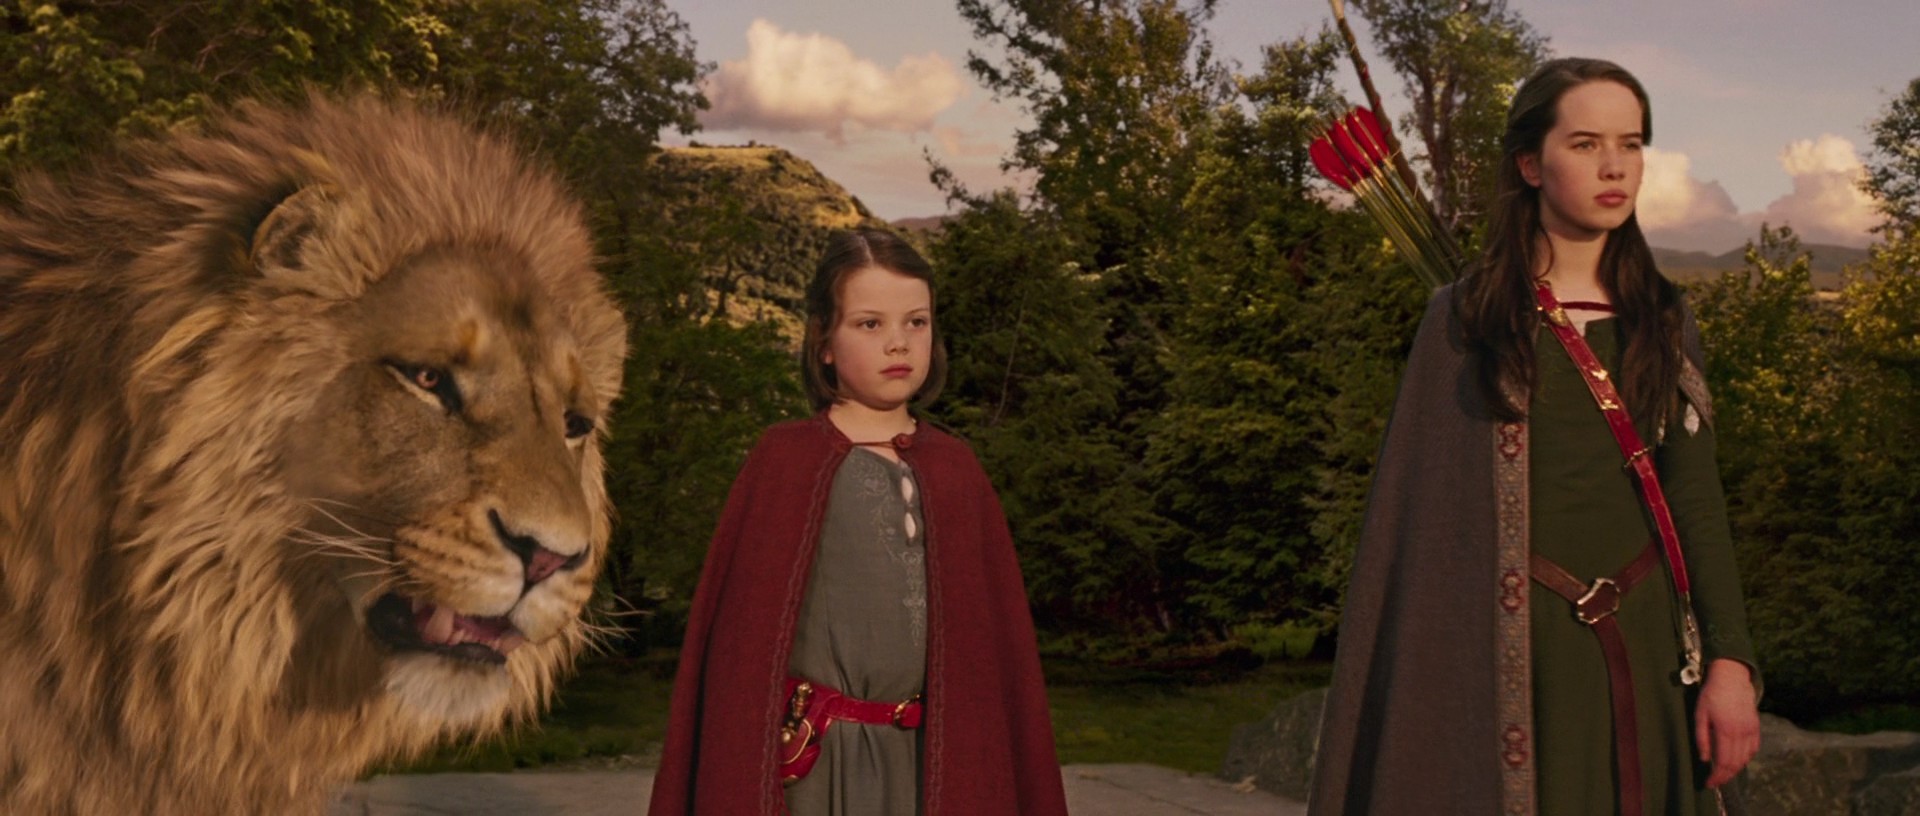 Wallpaper Blink Best Of The Chronicles Of Narnia Prince - Lion The Witch And The Wardrobe Aslan Lucy And Susan , HD Wallpaper & Backgrounds